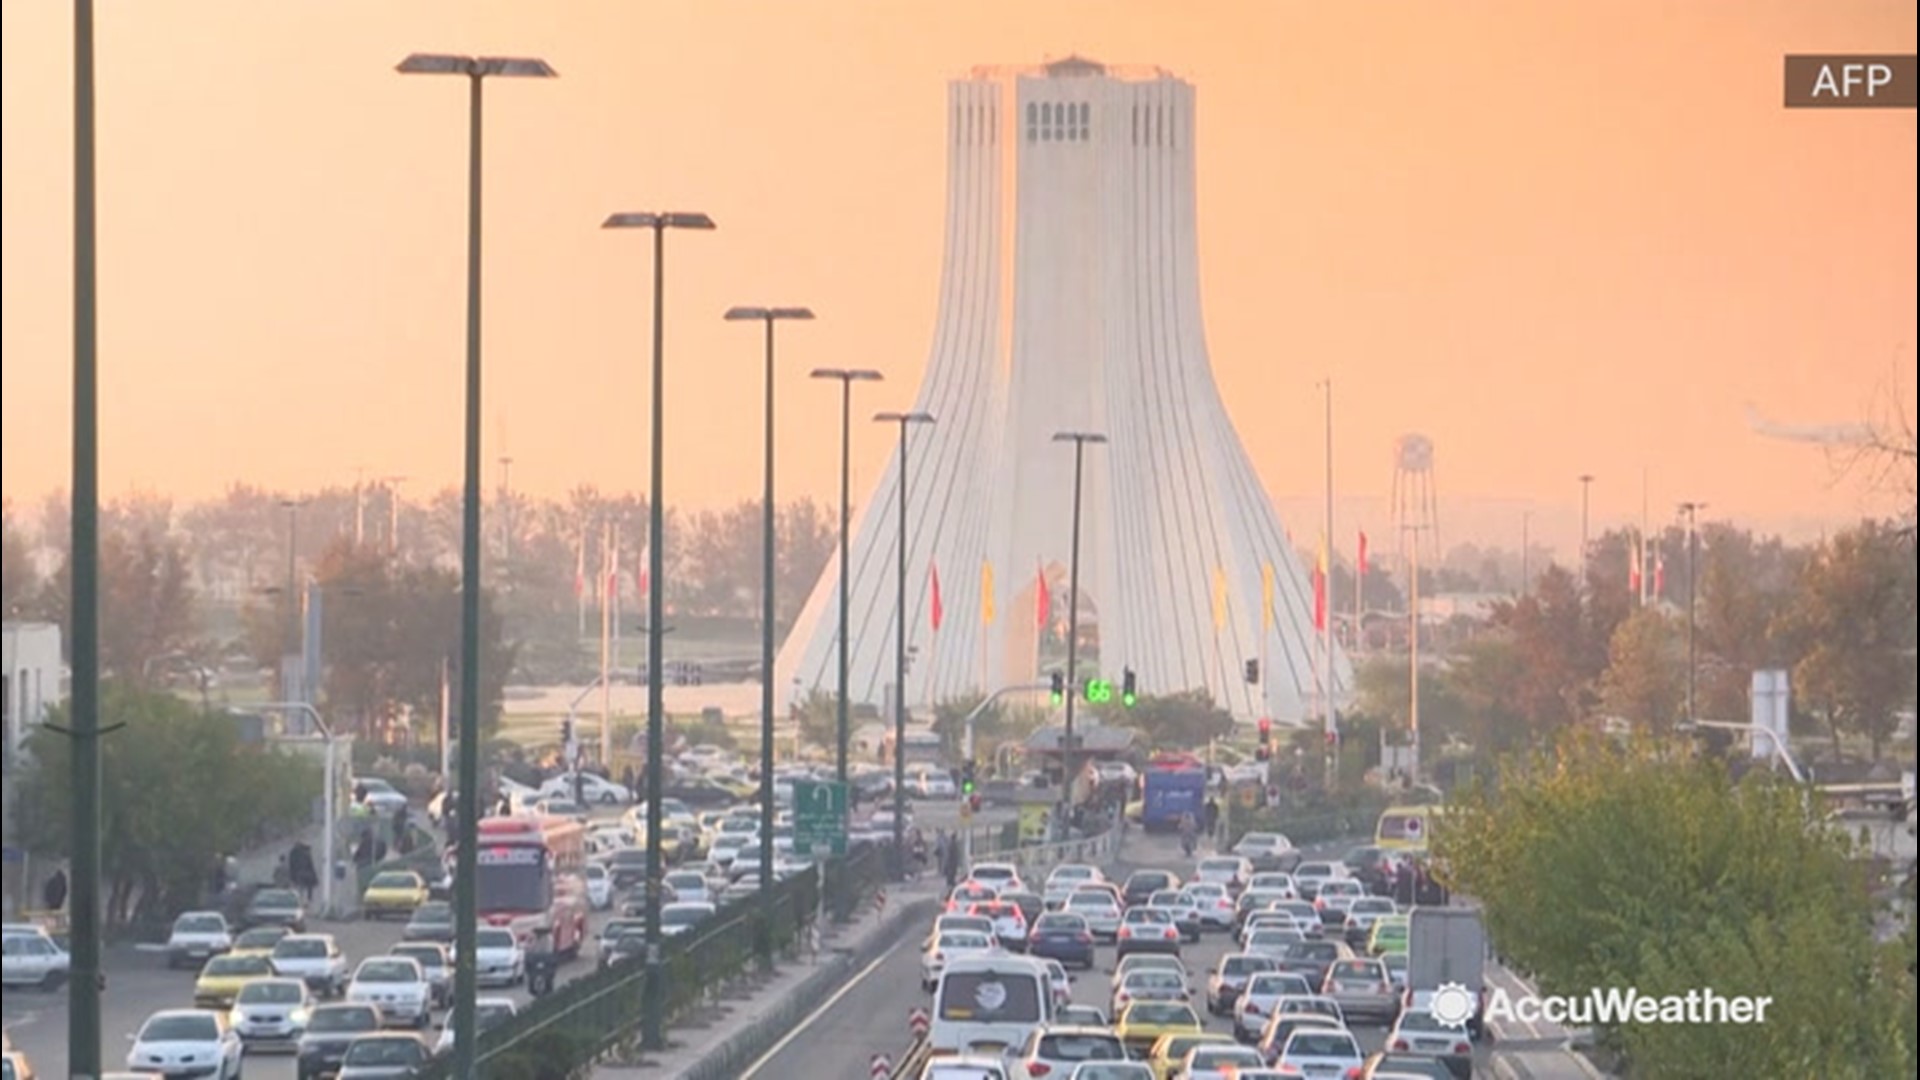 As pollution hit unhealthy levels in Tehran, Iran, the skies over the city were shrouded in smog on Nov. 13. Due to the poor air quality, schools across the city were ordered to be closed for the day.